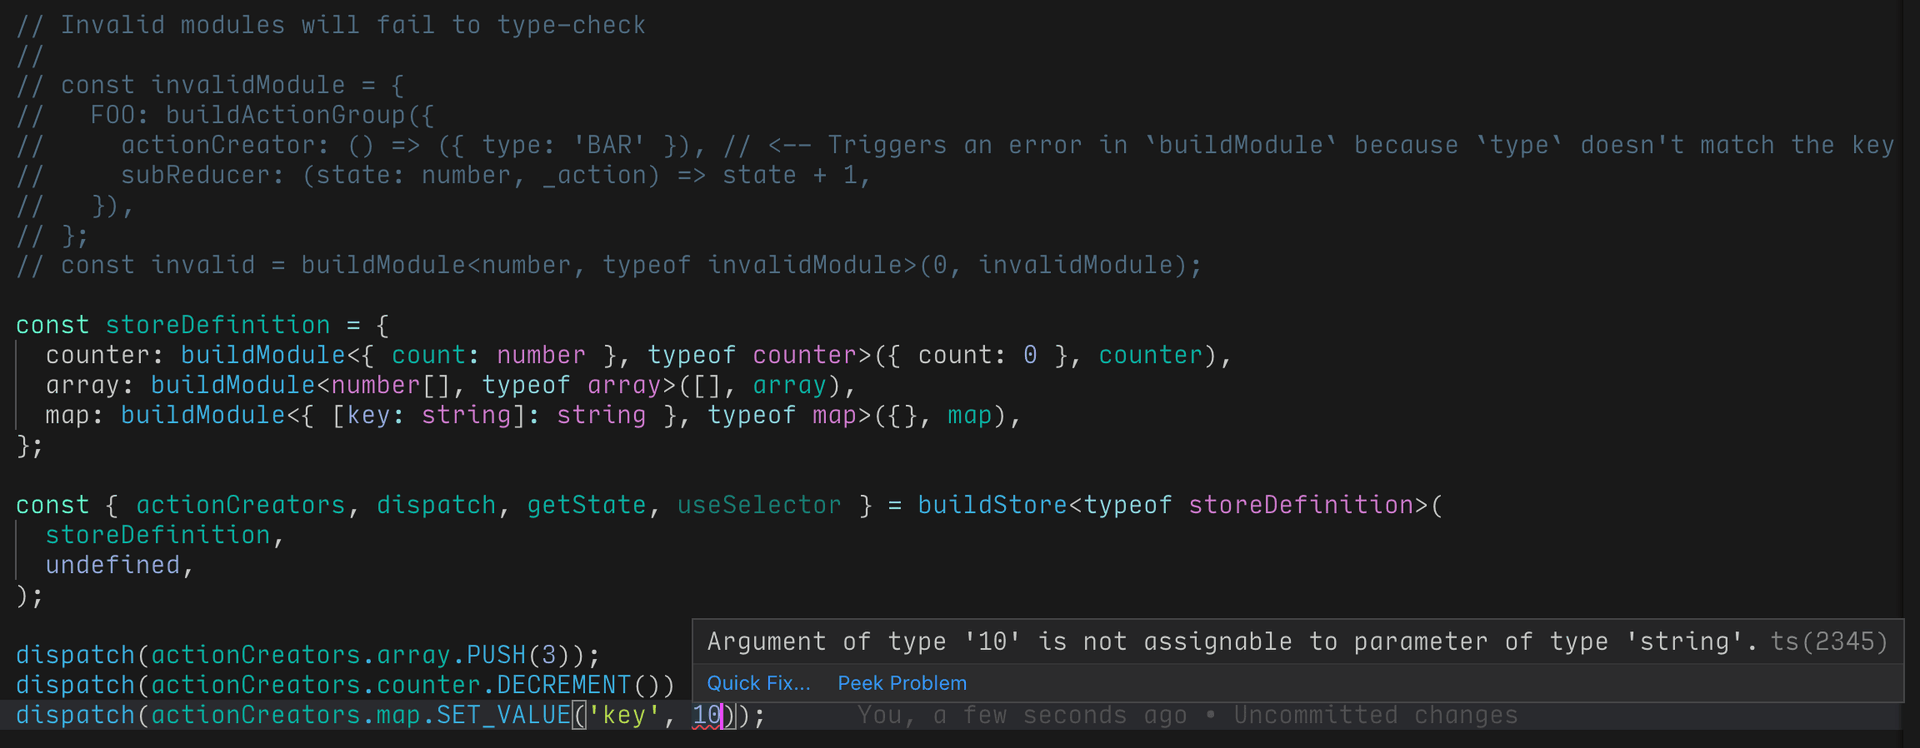 A screenshot of the VS Code text editor demonstrating the type inference provided by the Jantix library